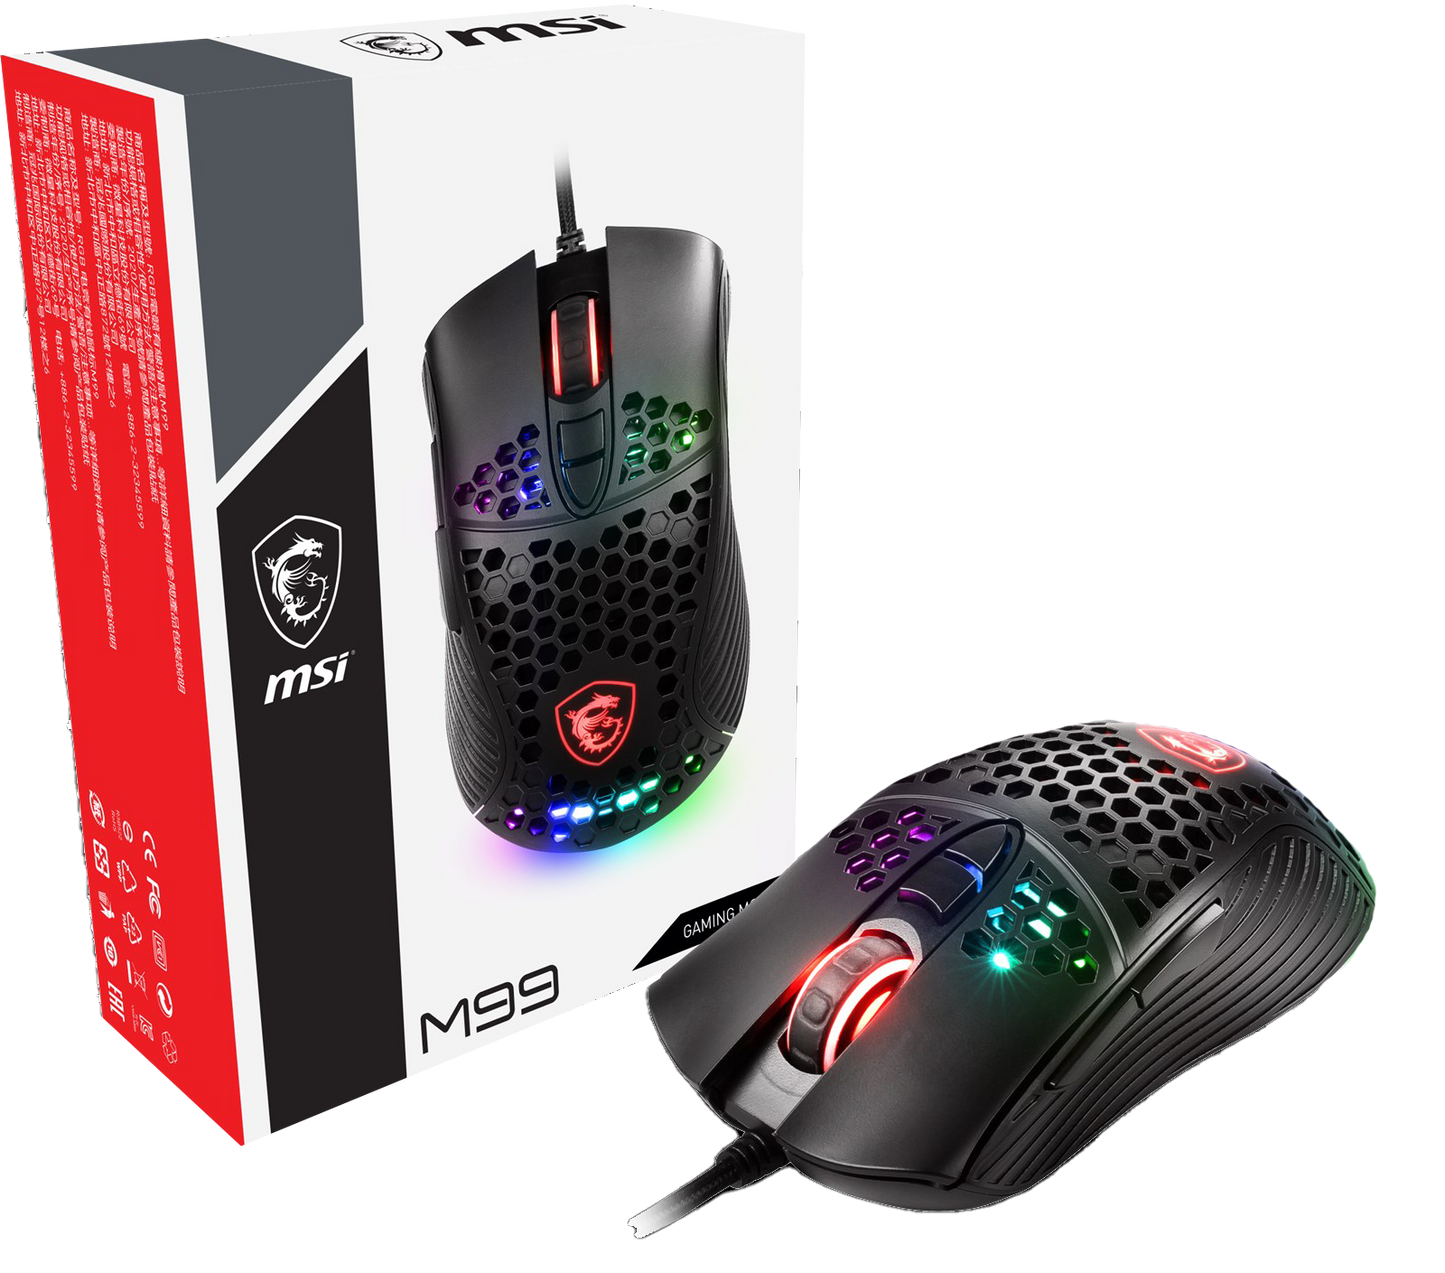 MSI M99 Gaming Mouse special